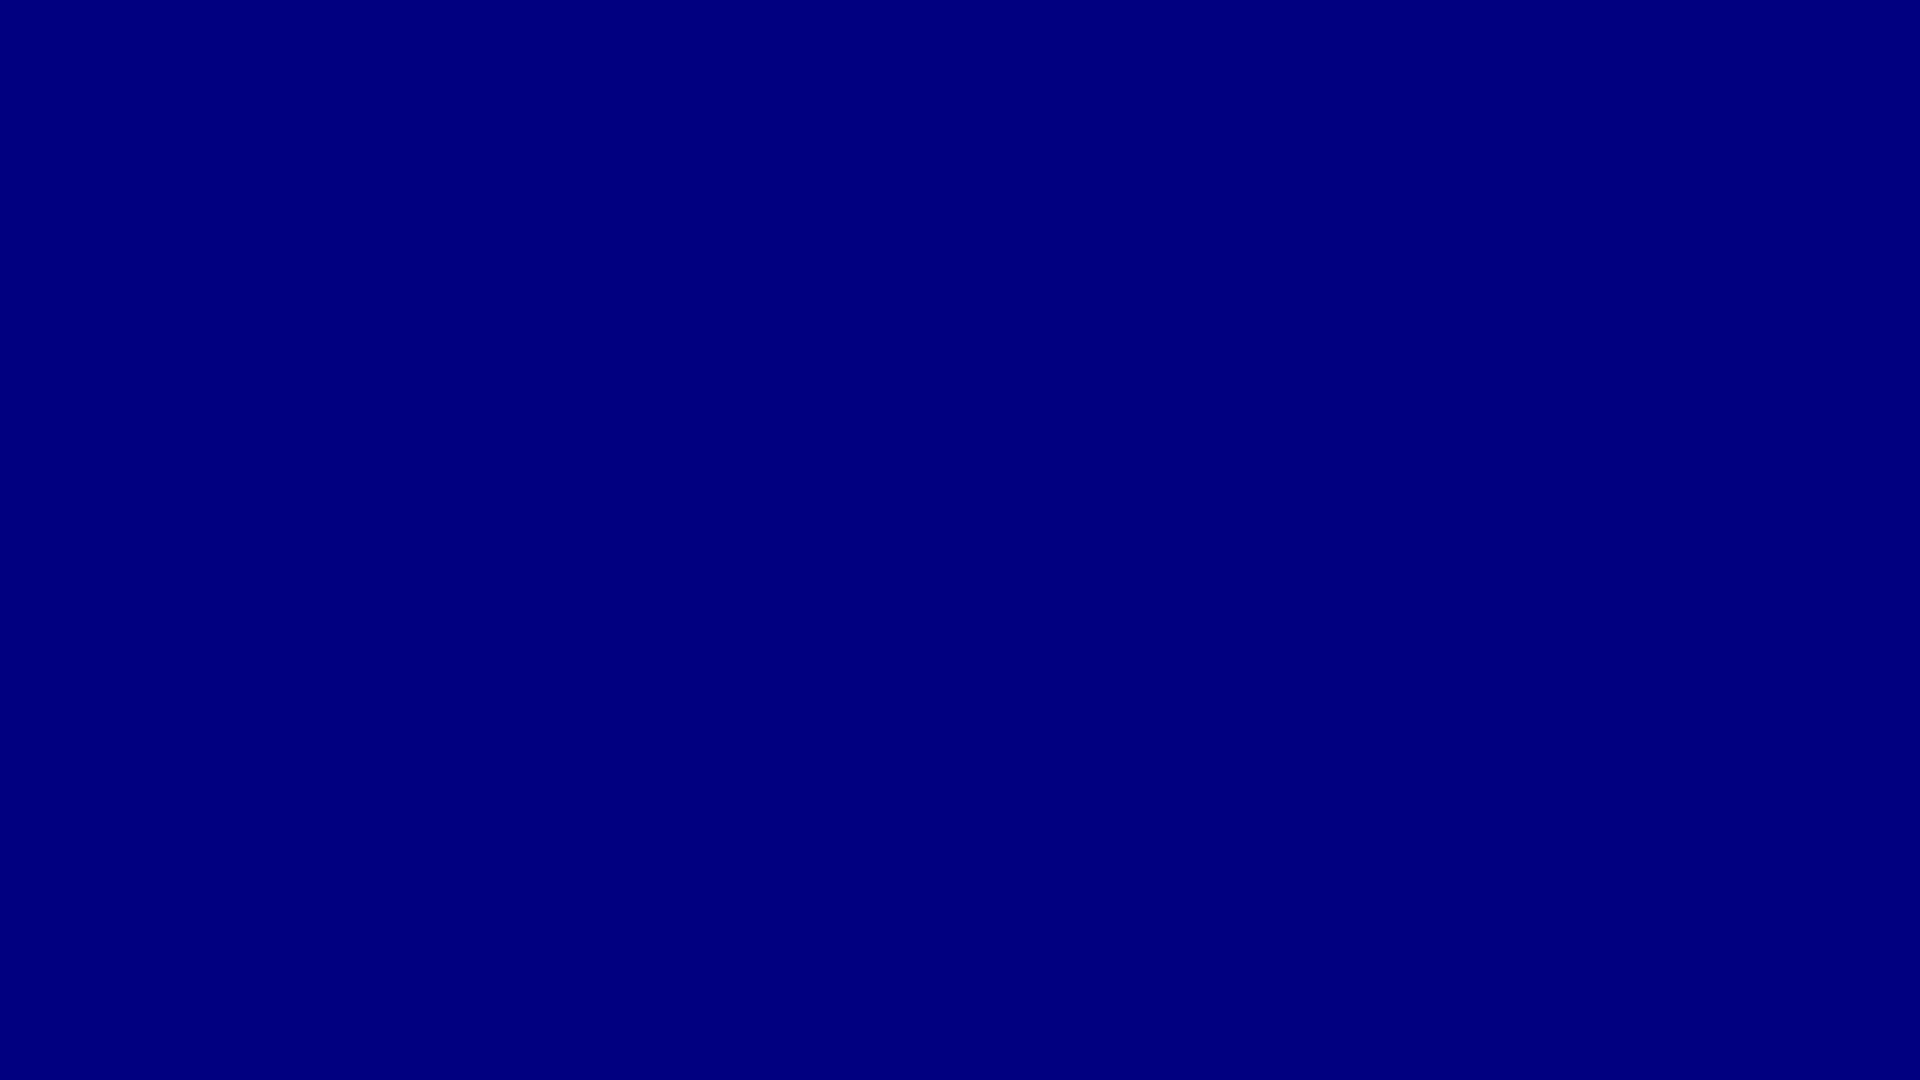 Pretty Solid Blue Background Navy